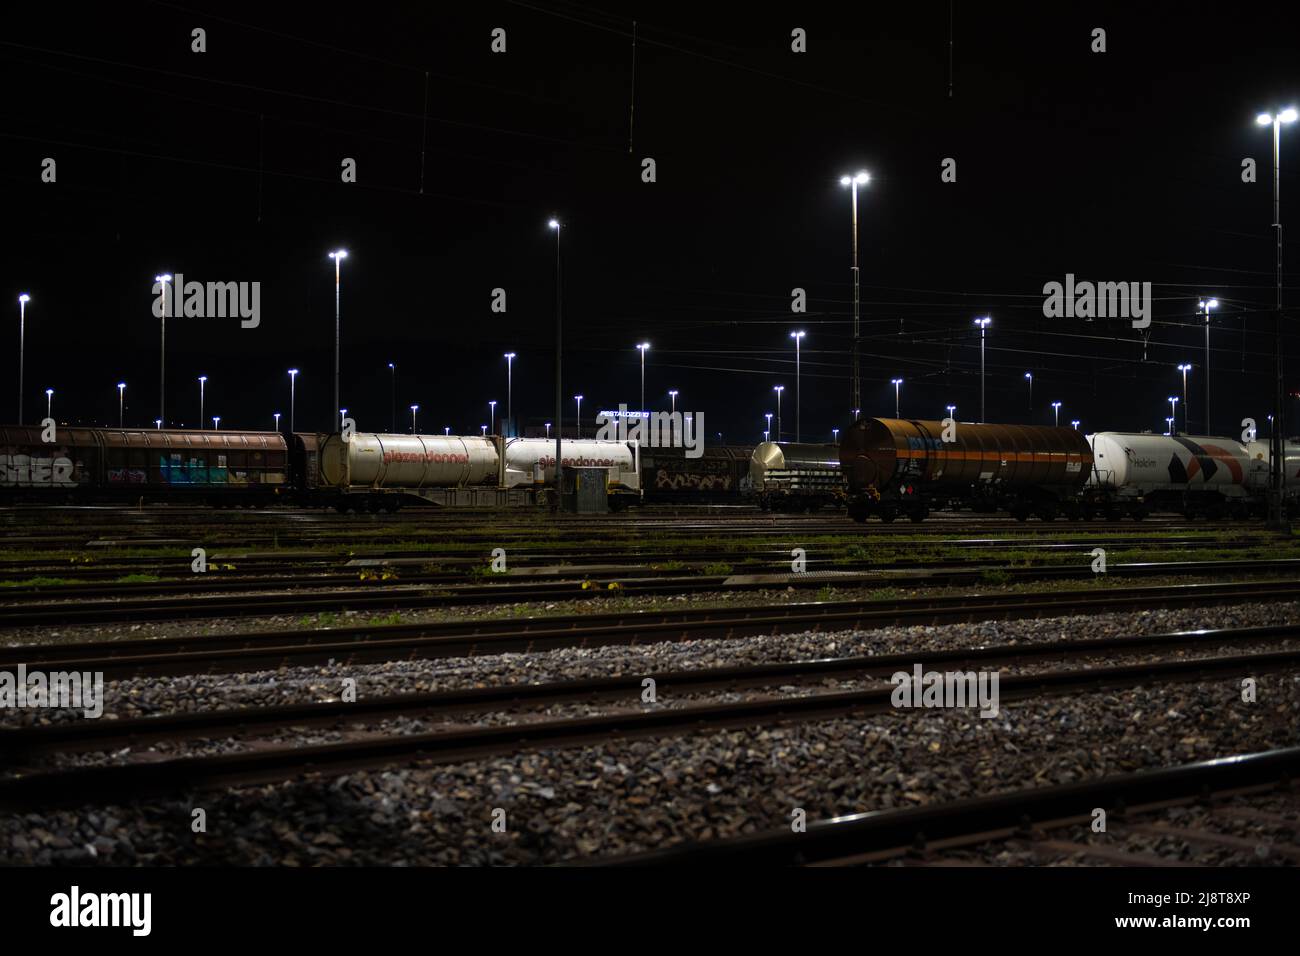 Freight station at night in Zurich, Spreitenbach. Freight trains are illuminated by bright headlights. Stock Photo